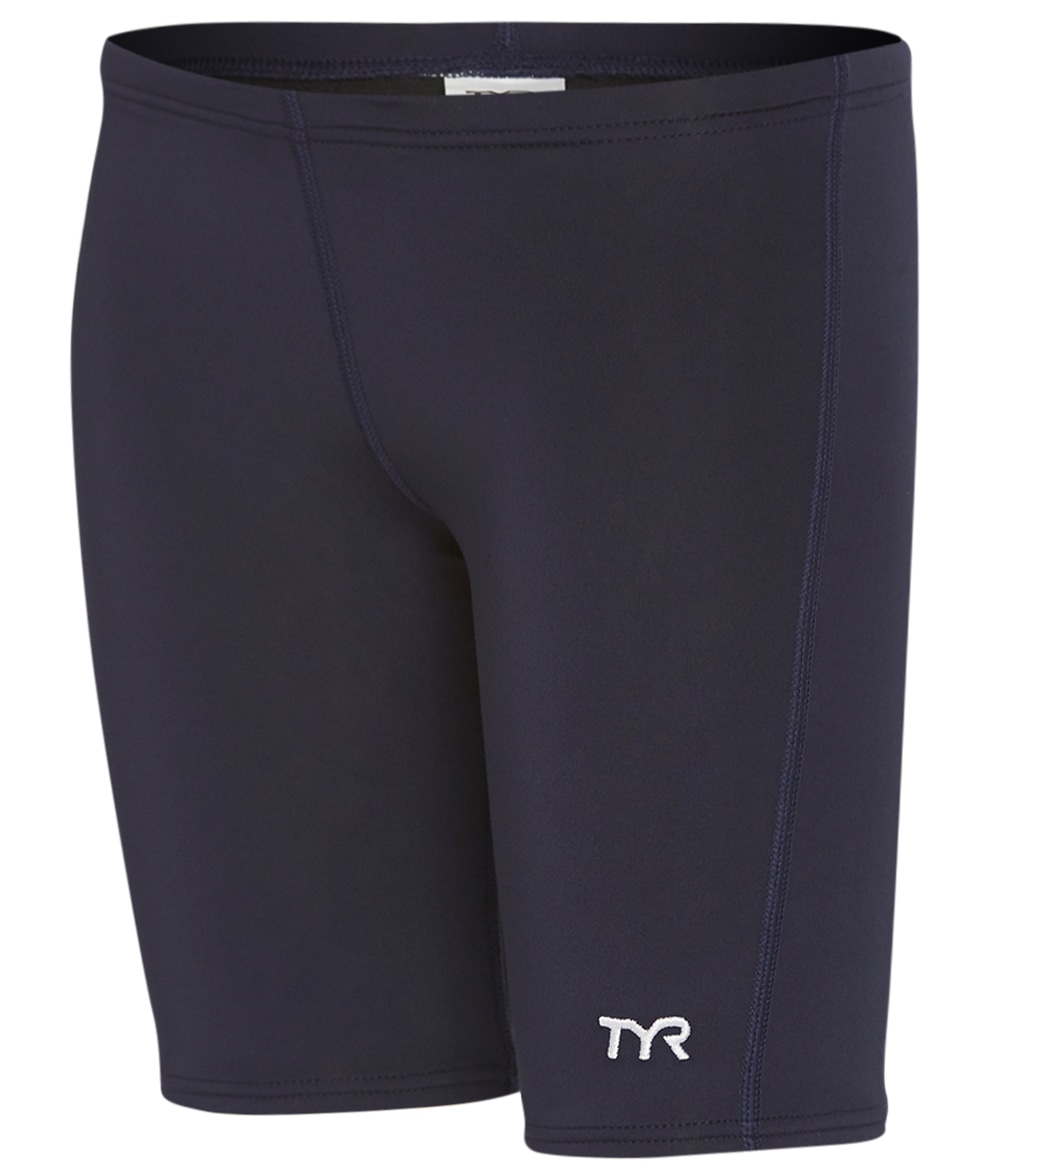 TYR Boys' Solid Jammer Swimsuit - Navy Large 12/14 Polyester/Spandex - Swimoutlet.com